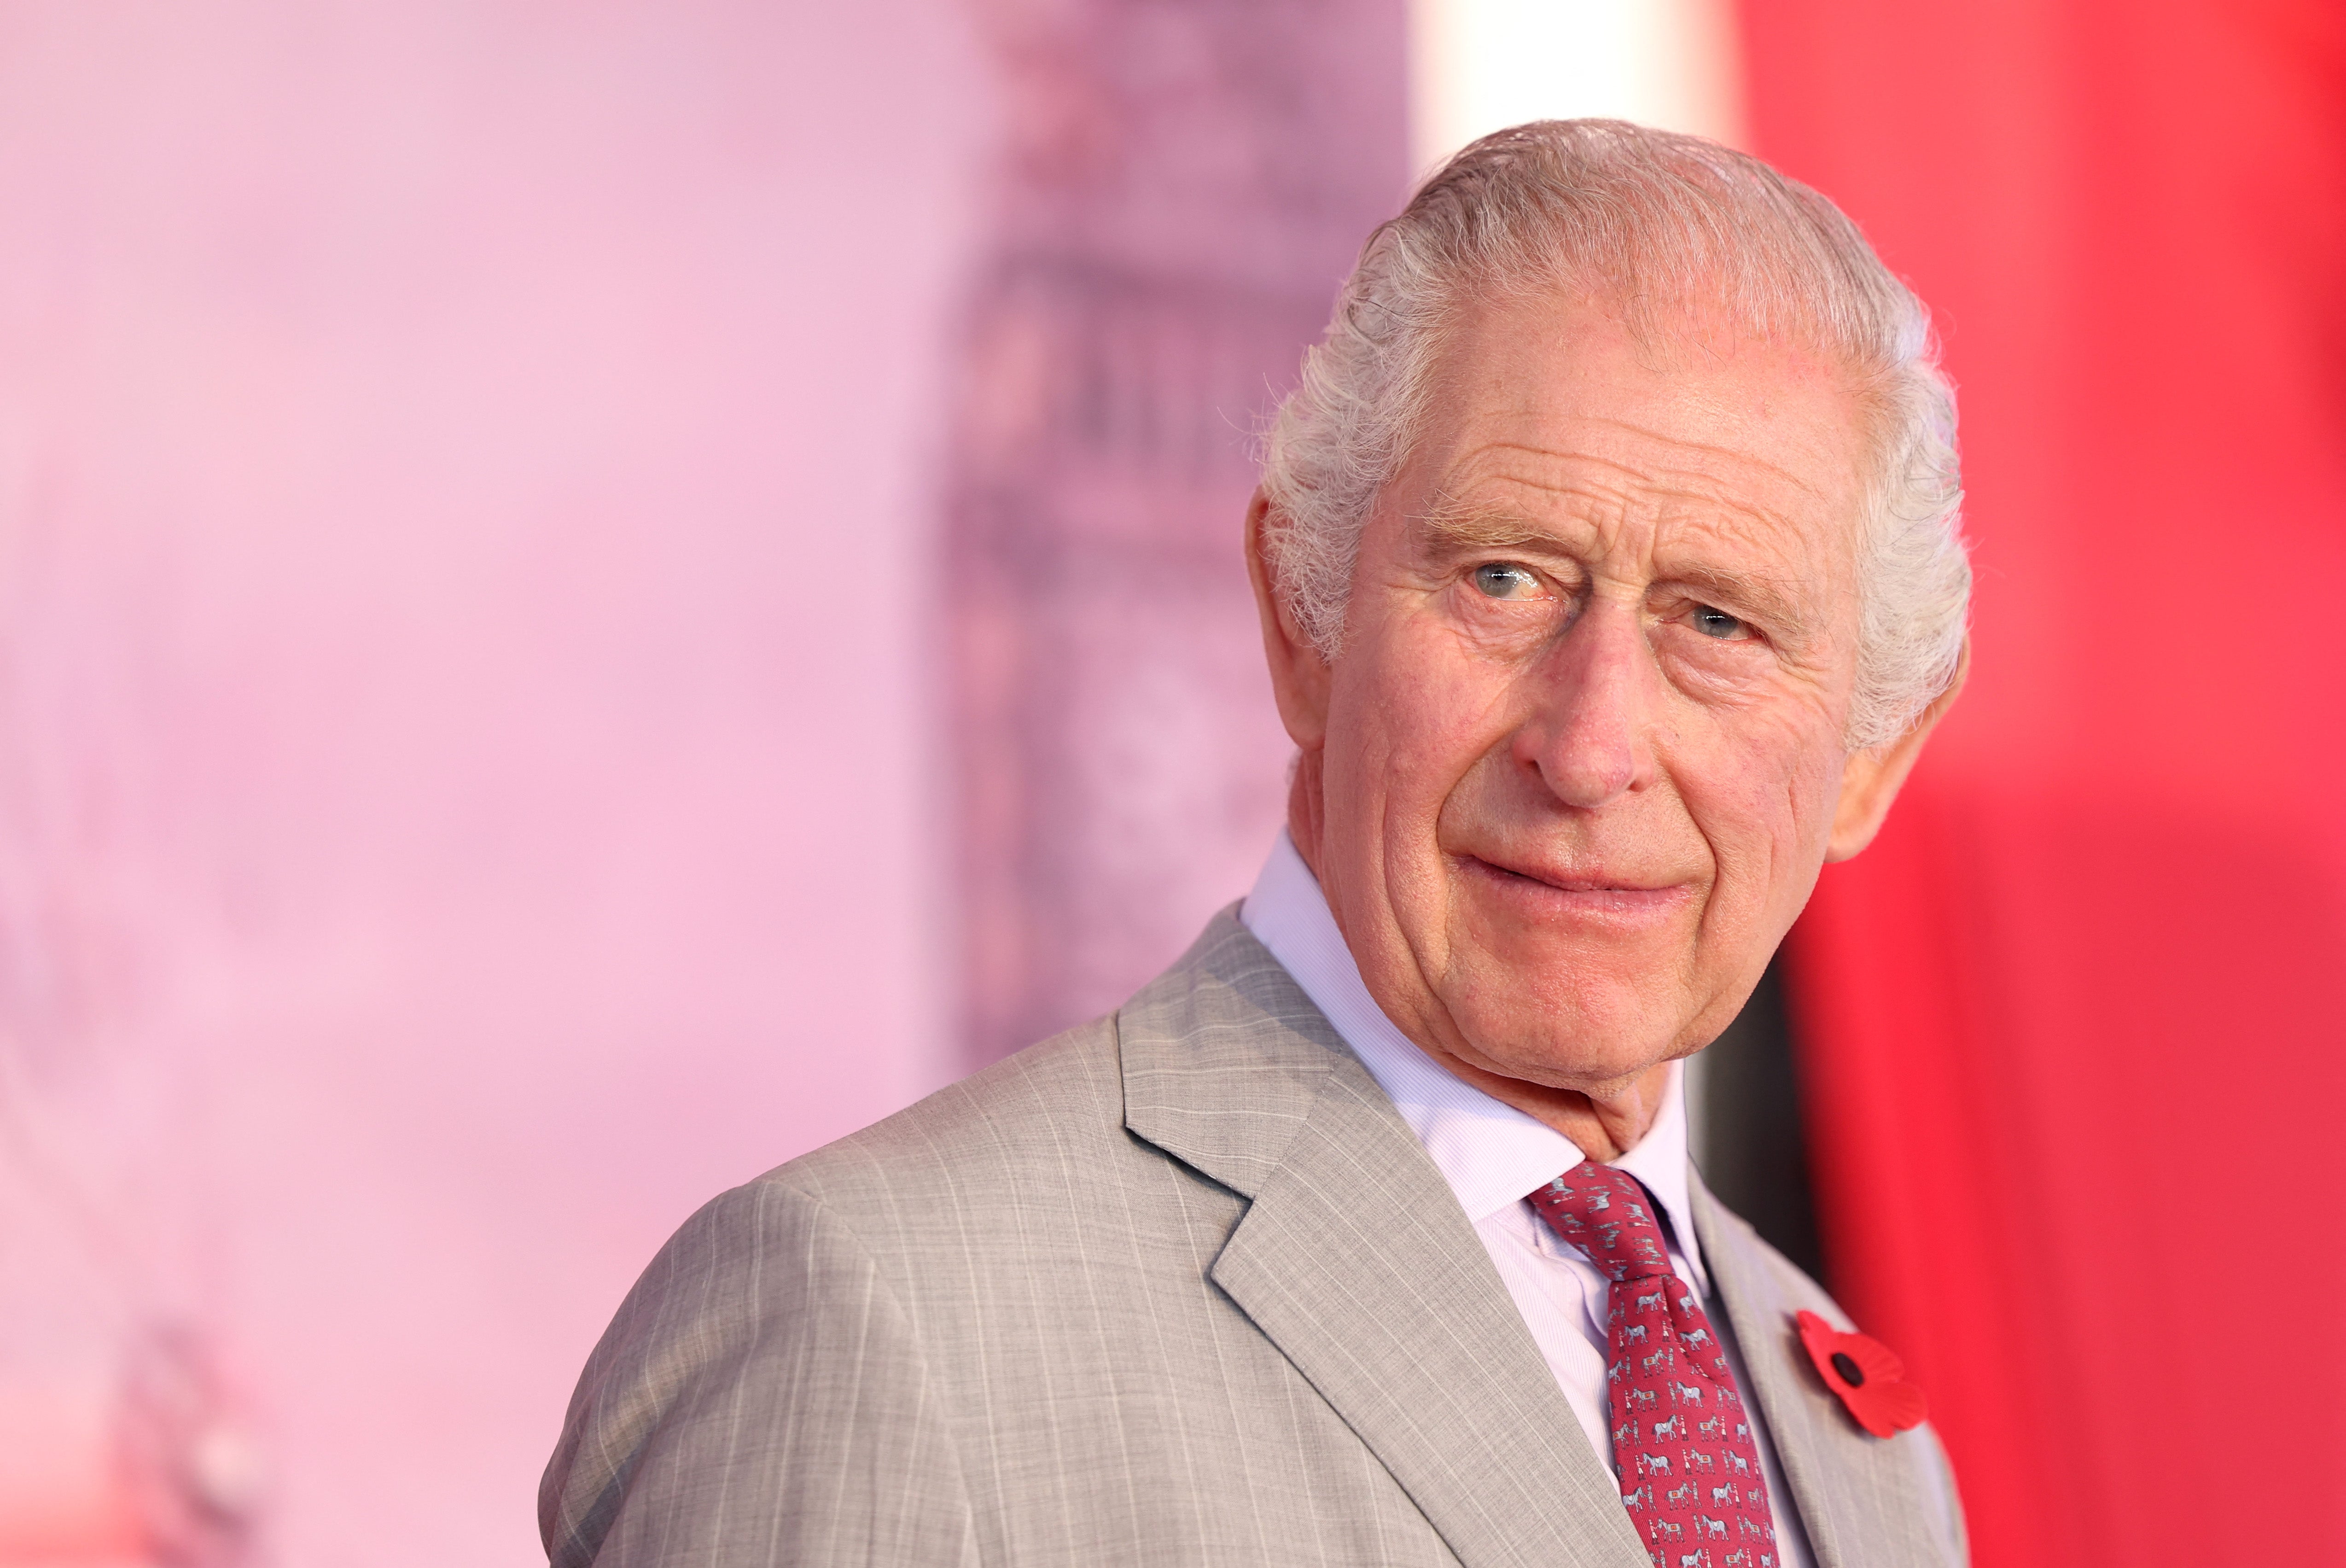 King Charles III will attend hospital next week for treatment for an enlarged prostate